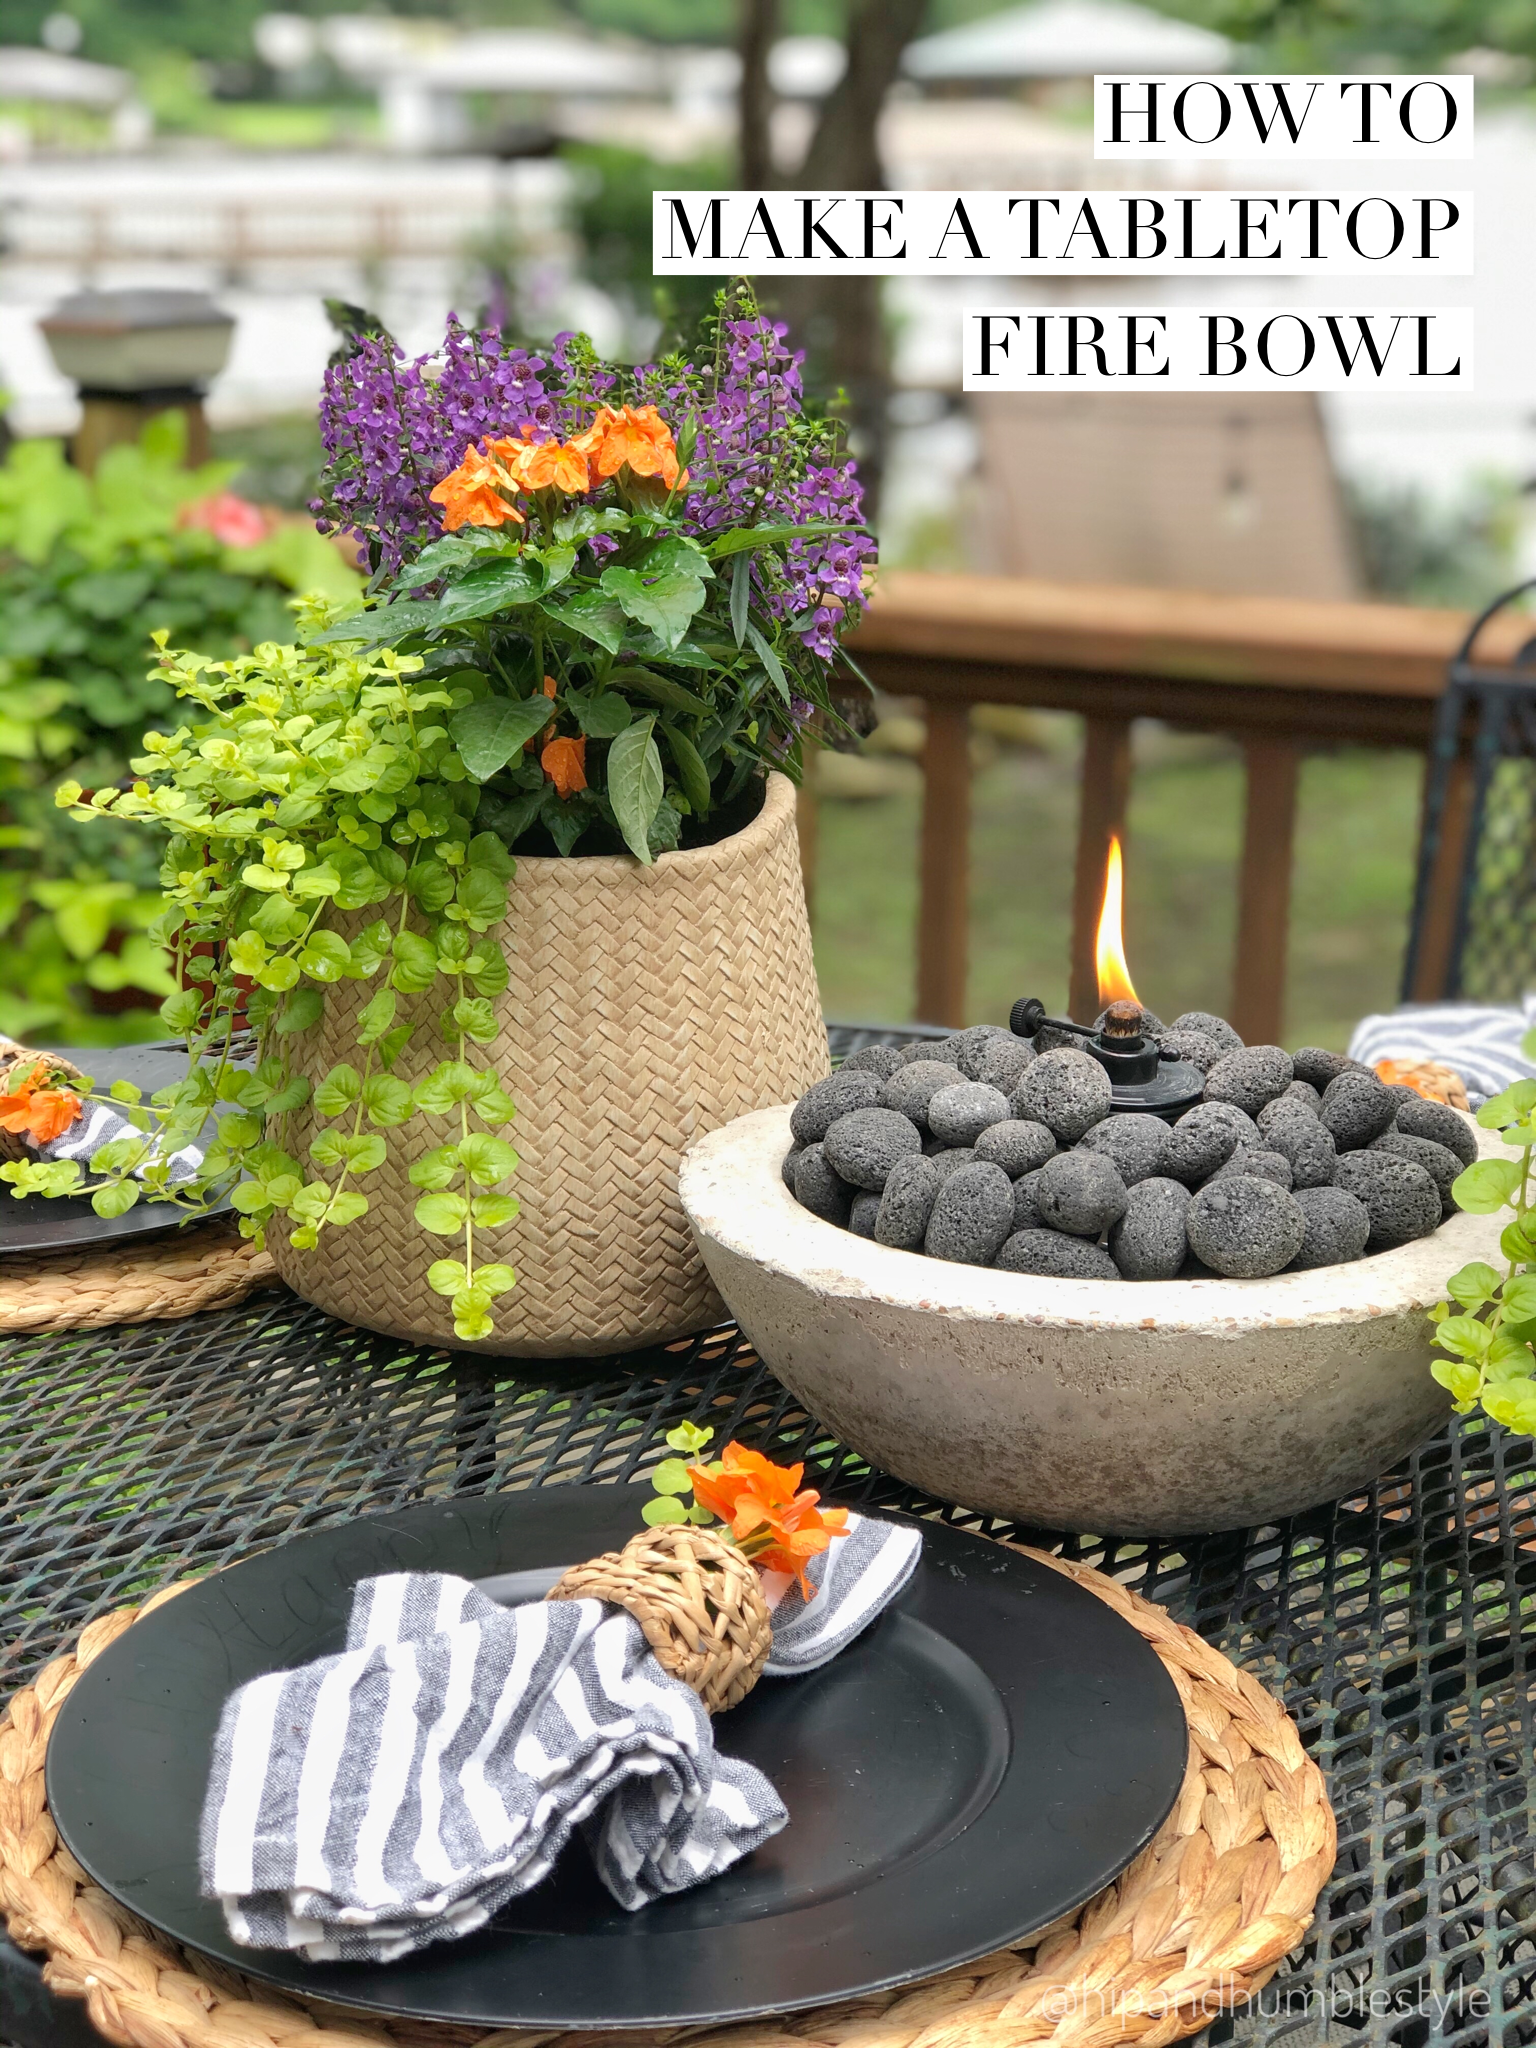 How To Make A Diy Tabletop Fire Bowl, Citronella Fire Pit Rocks